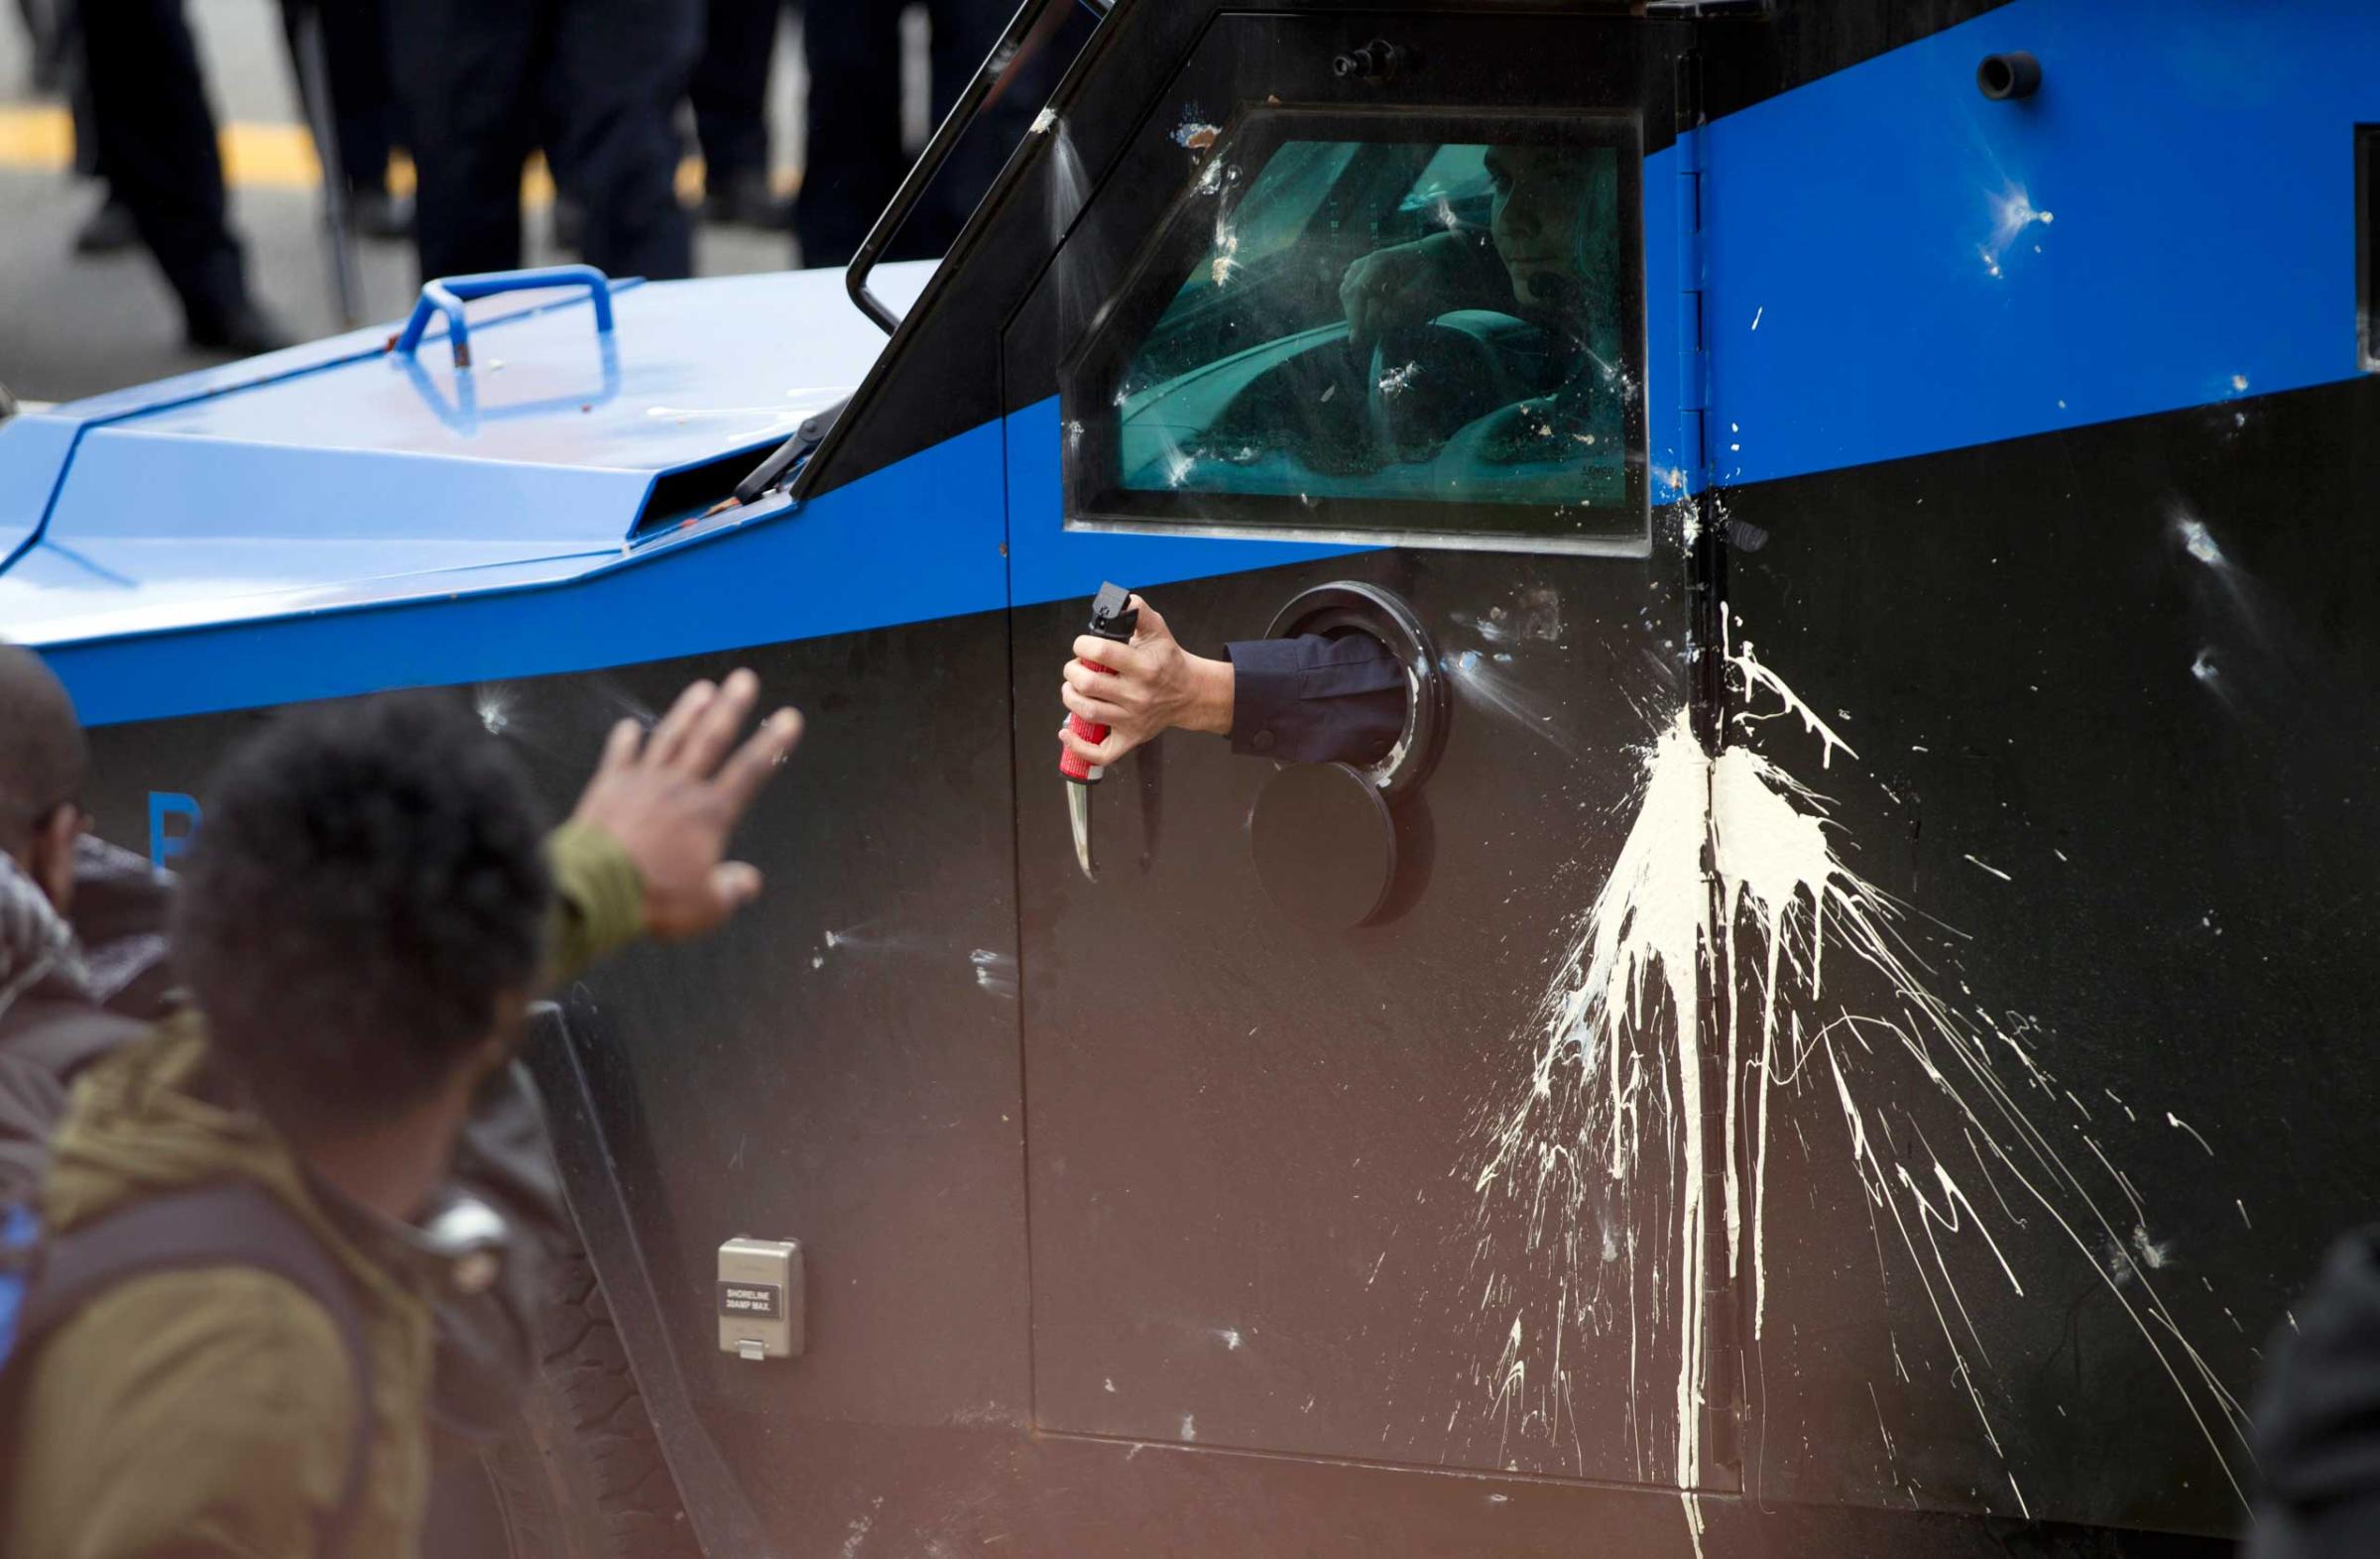 Police officers use pepper spray against demonstrators after the funeral of Freddie Gray in Baltimore on April 27, 2015.